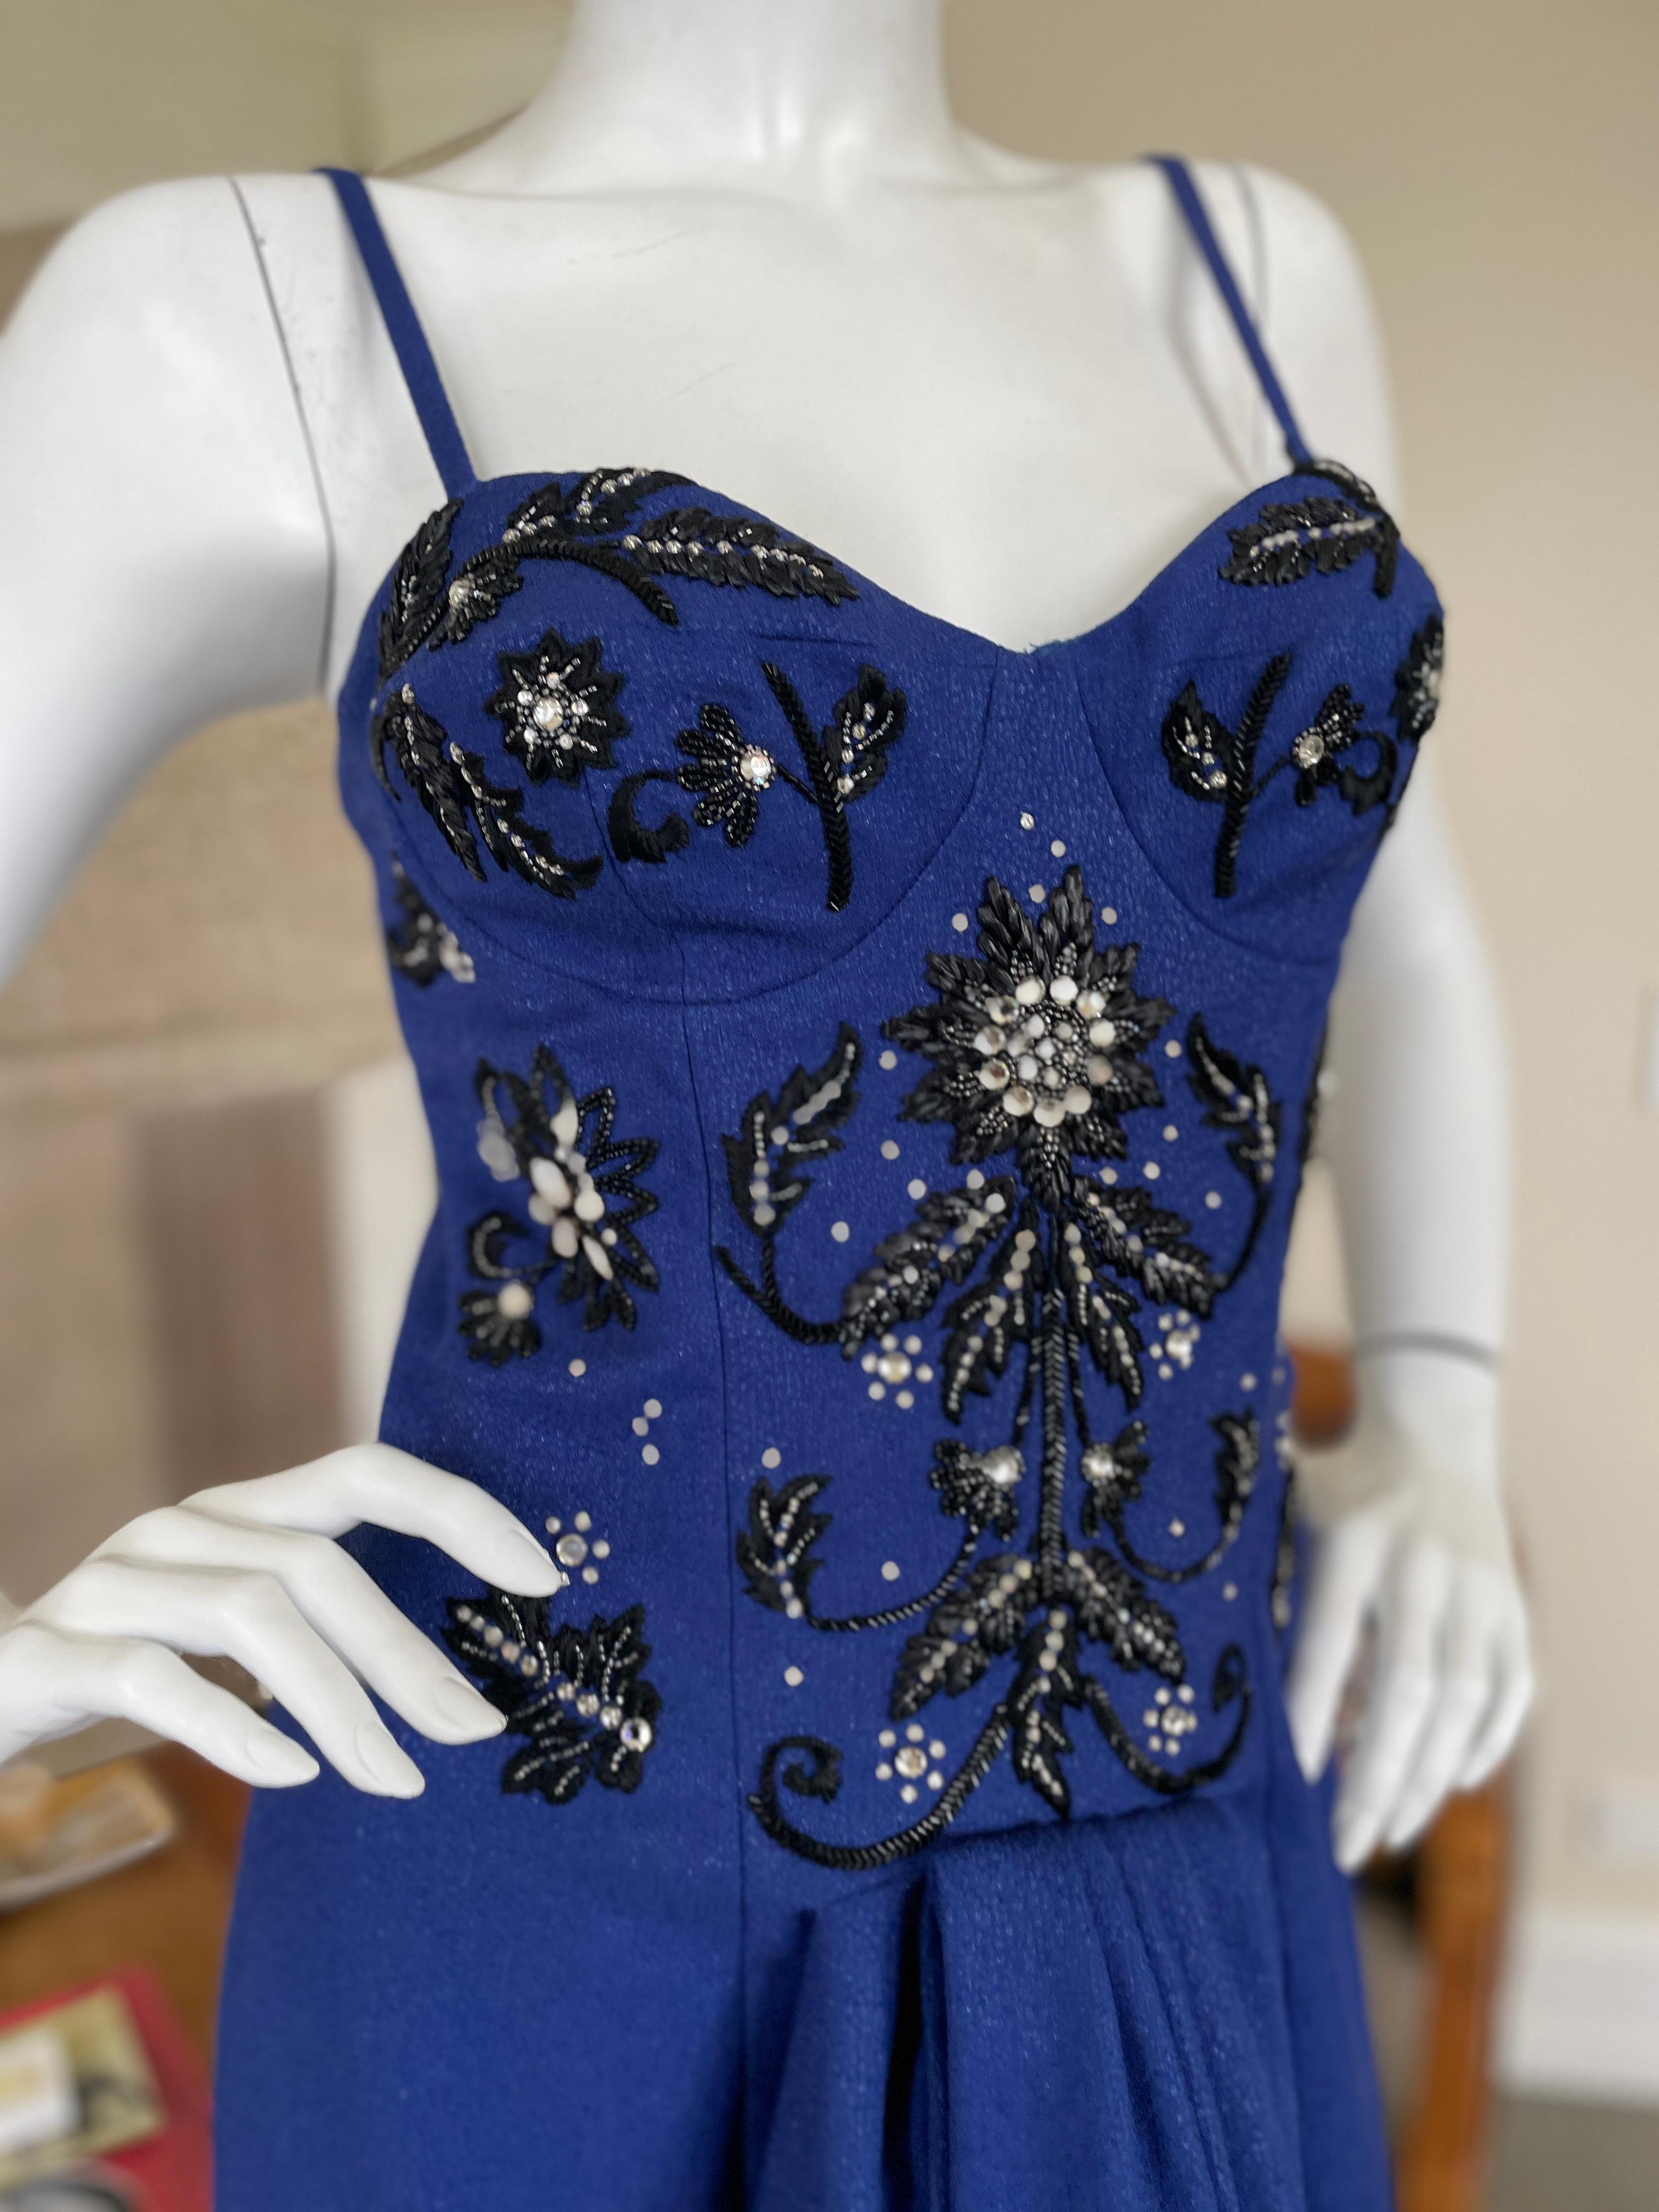 Christian Dior by John Galliano Fall 2007 Blue Dress with Crystal Details For Sale 6